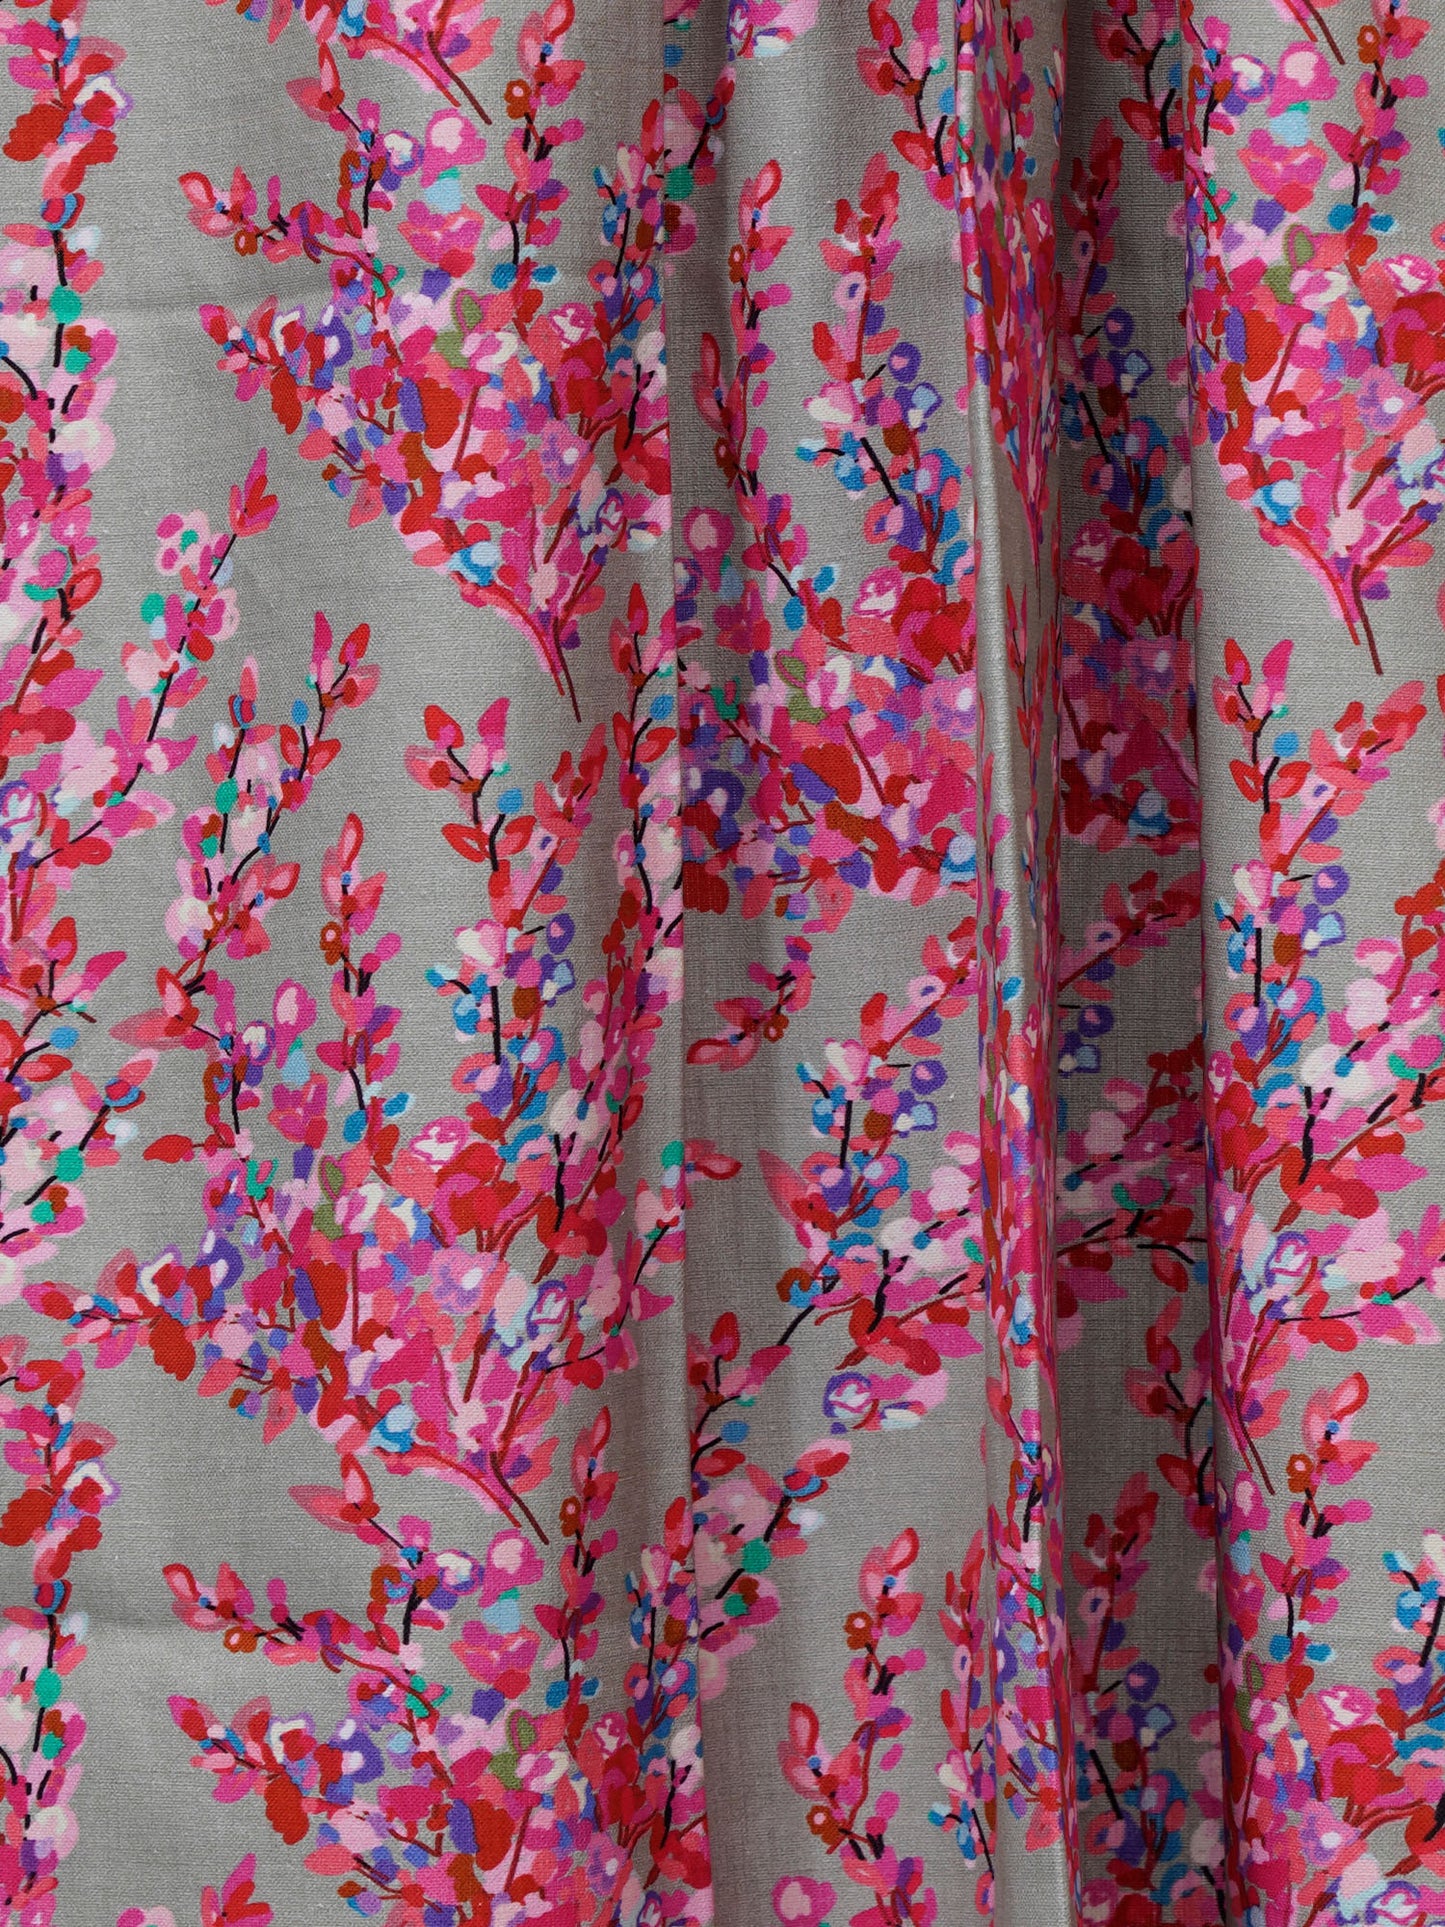 Door Curtain Cotton Blend Digital Print Floral Pink and Red - 84" X 50"